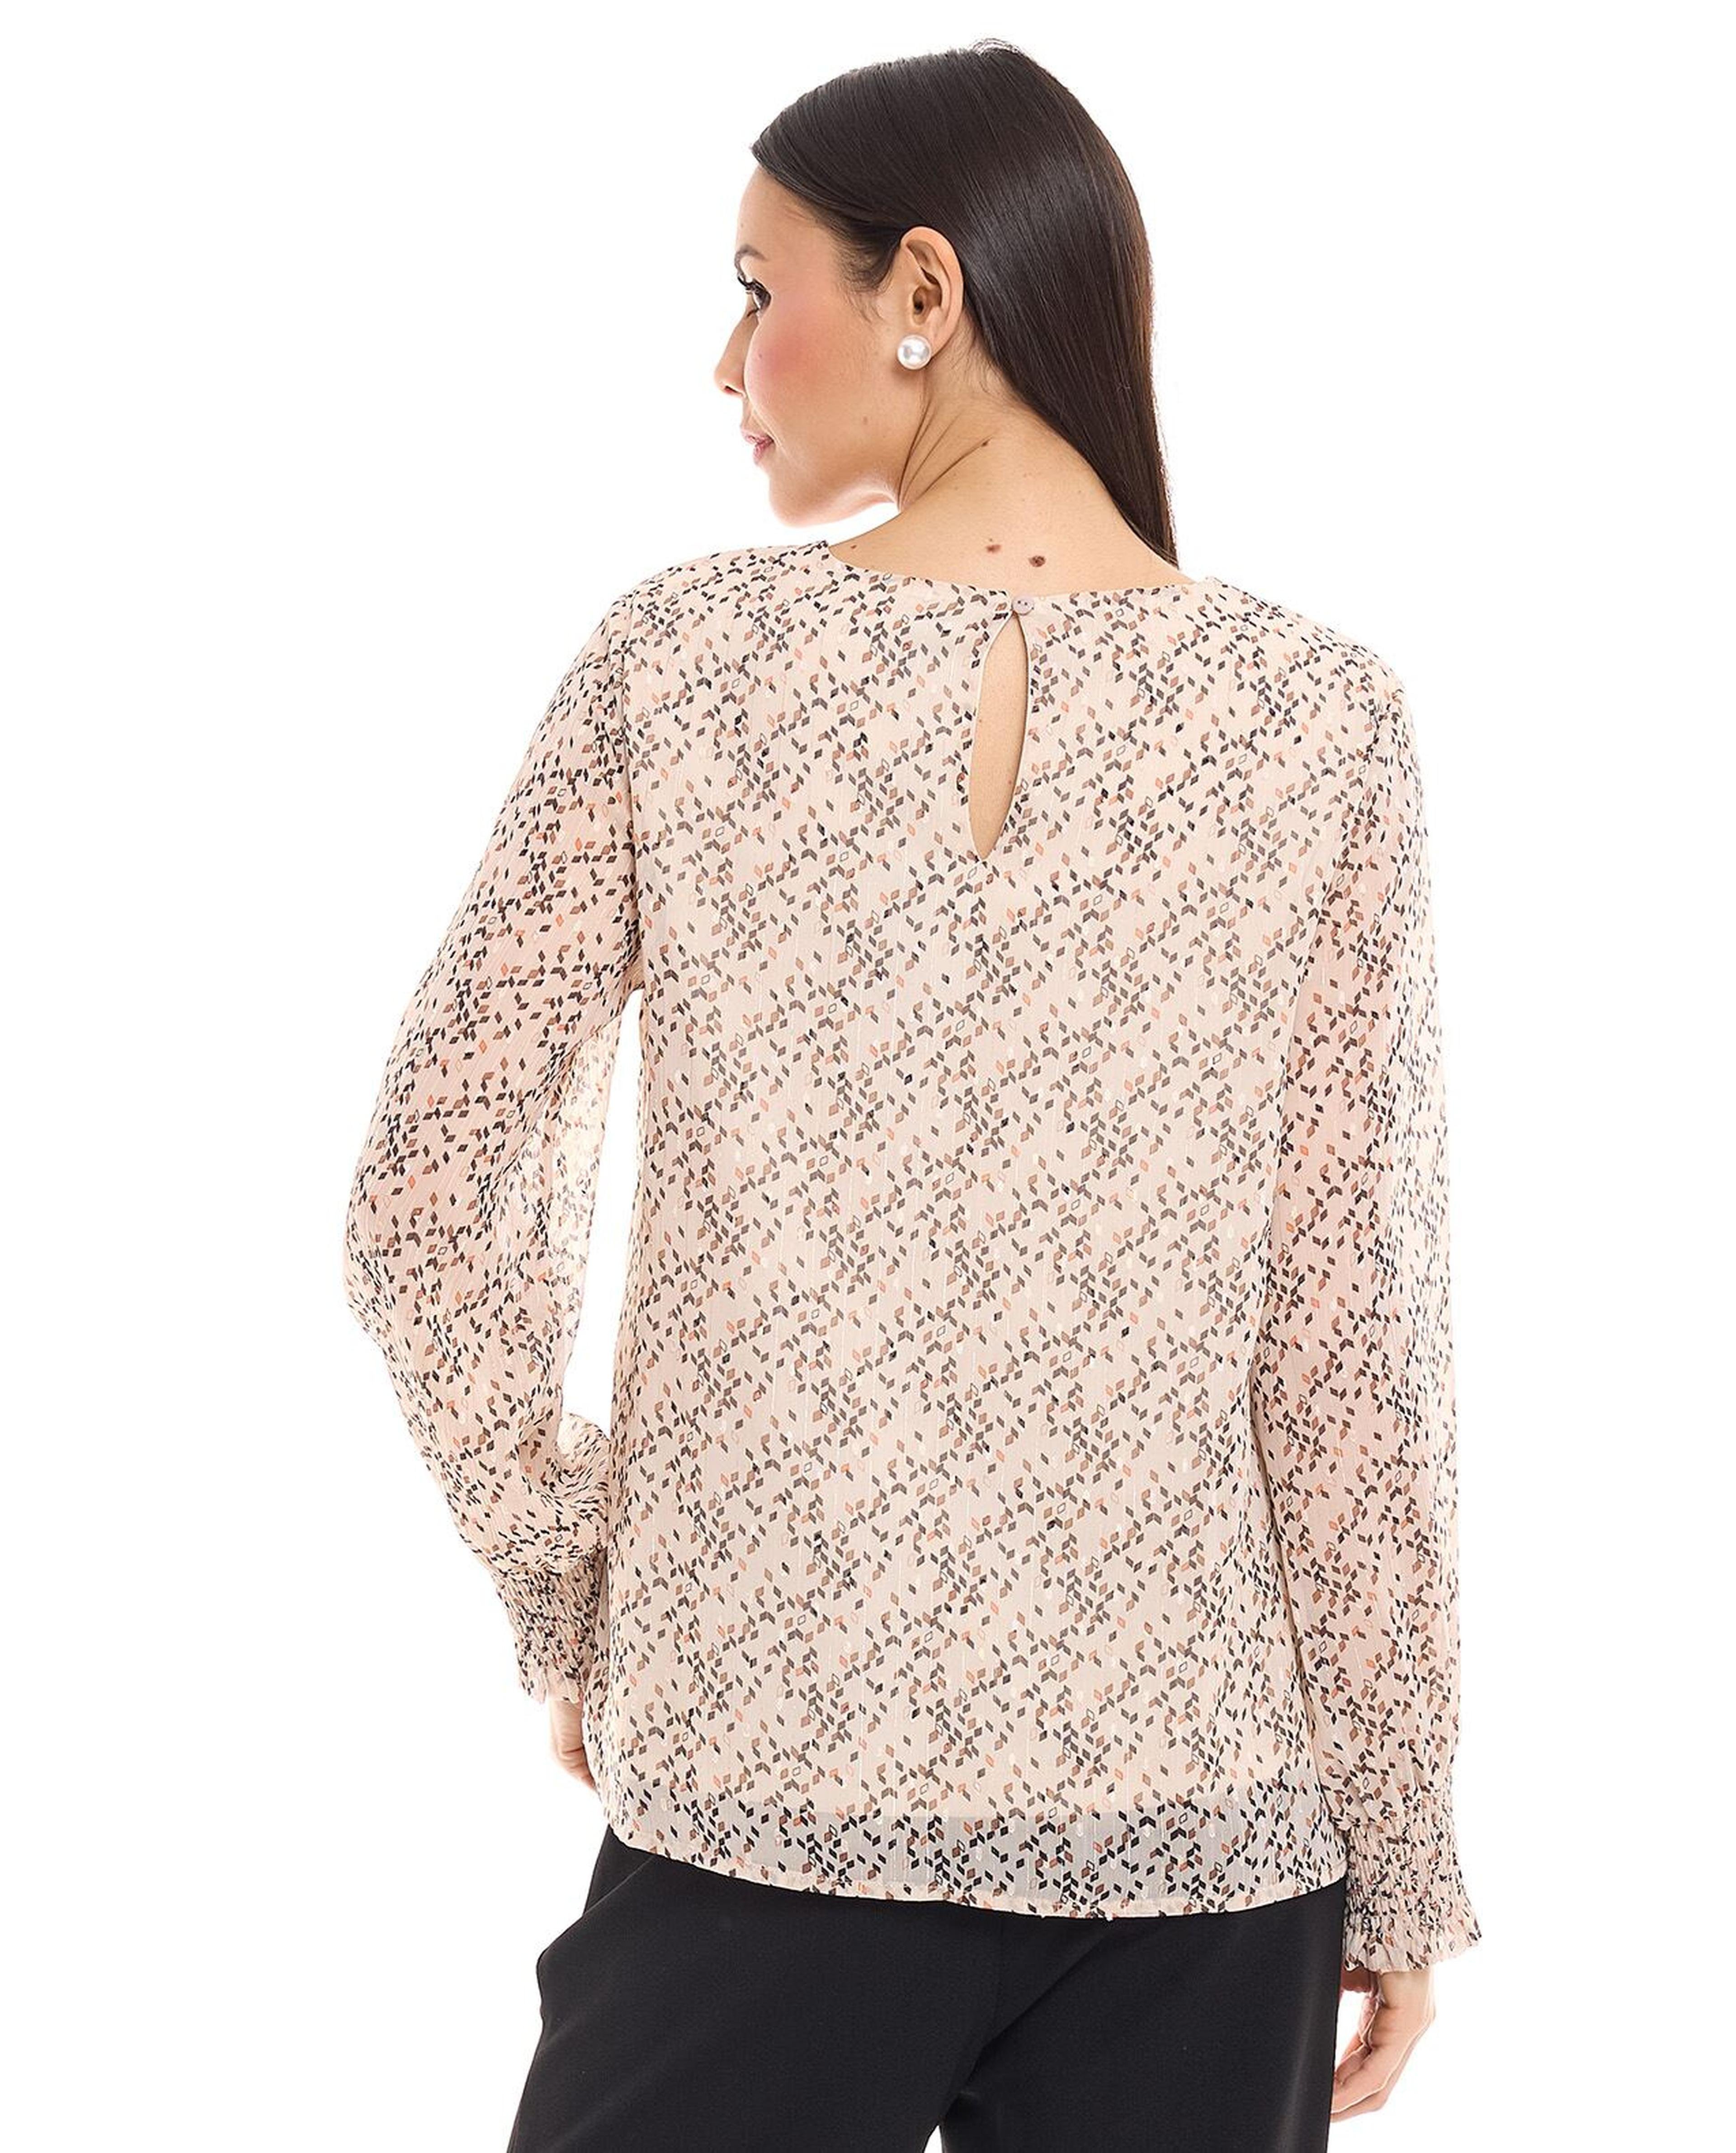 Printed Top with Crew Neck and Long Sleeves